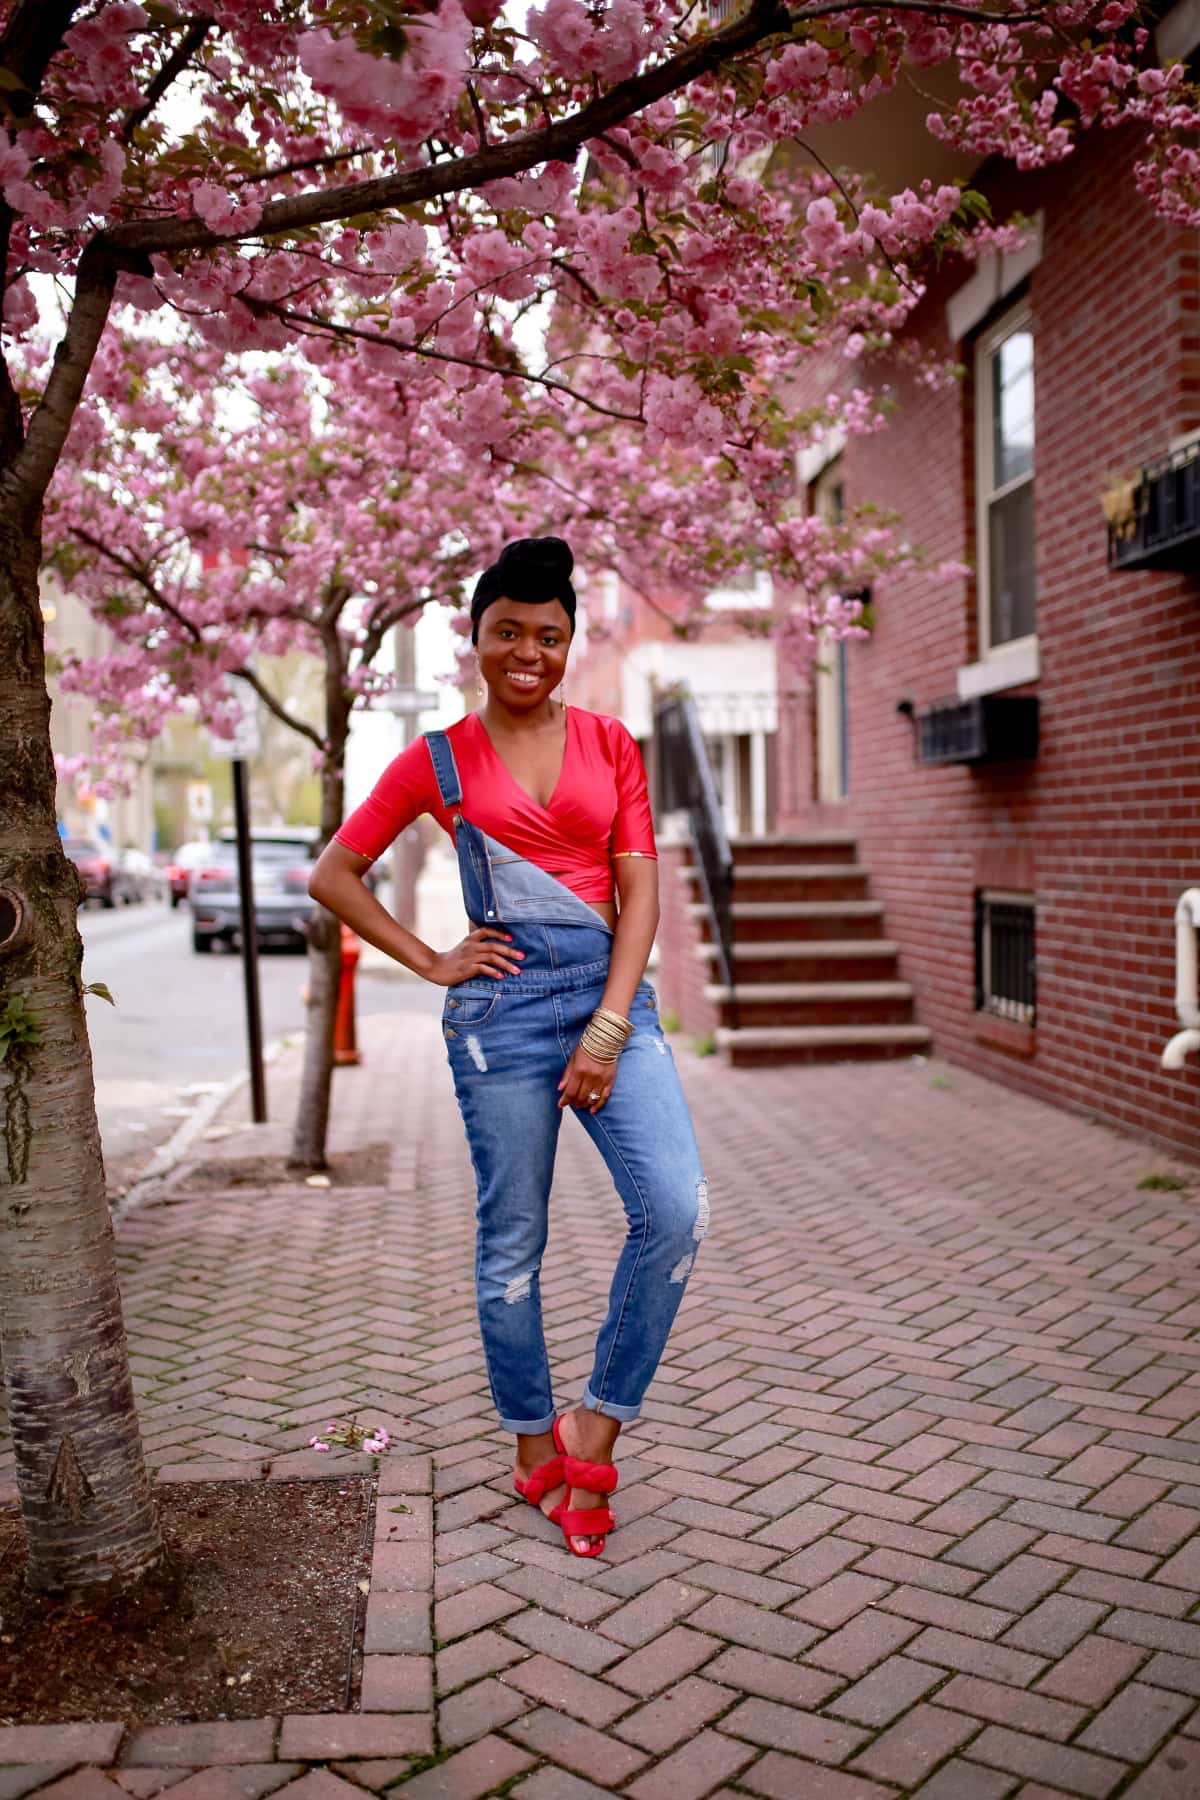 New Jersey fashion blogger shows us her favorite way to wear the distressed denim overalls trend. Regain that youthful vibe for a day out or dress it up for work and meetings. #distressedjeans #overalls